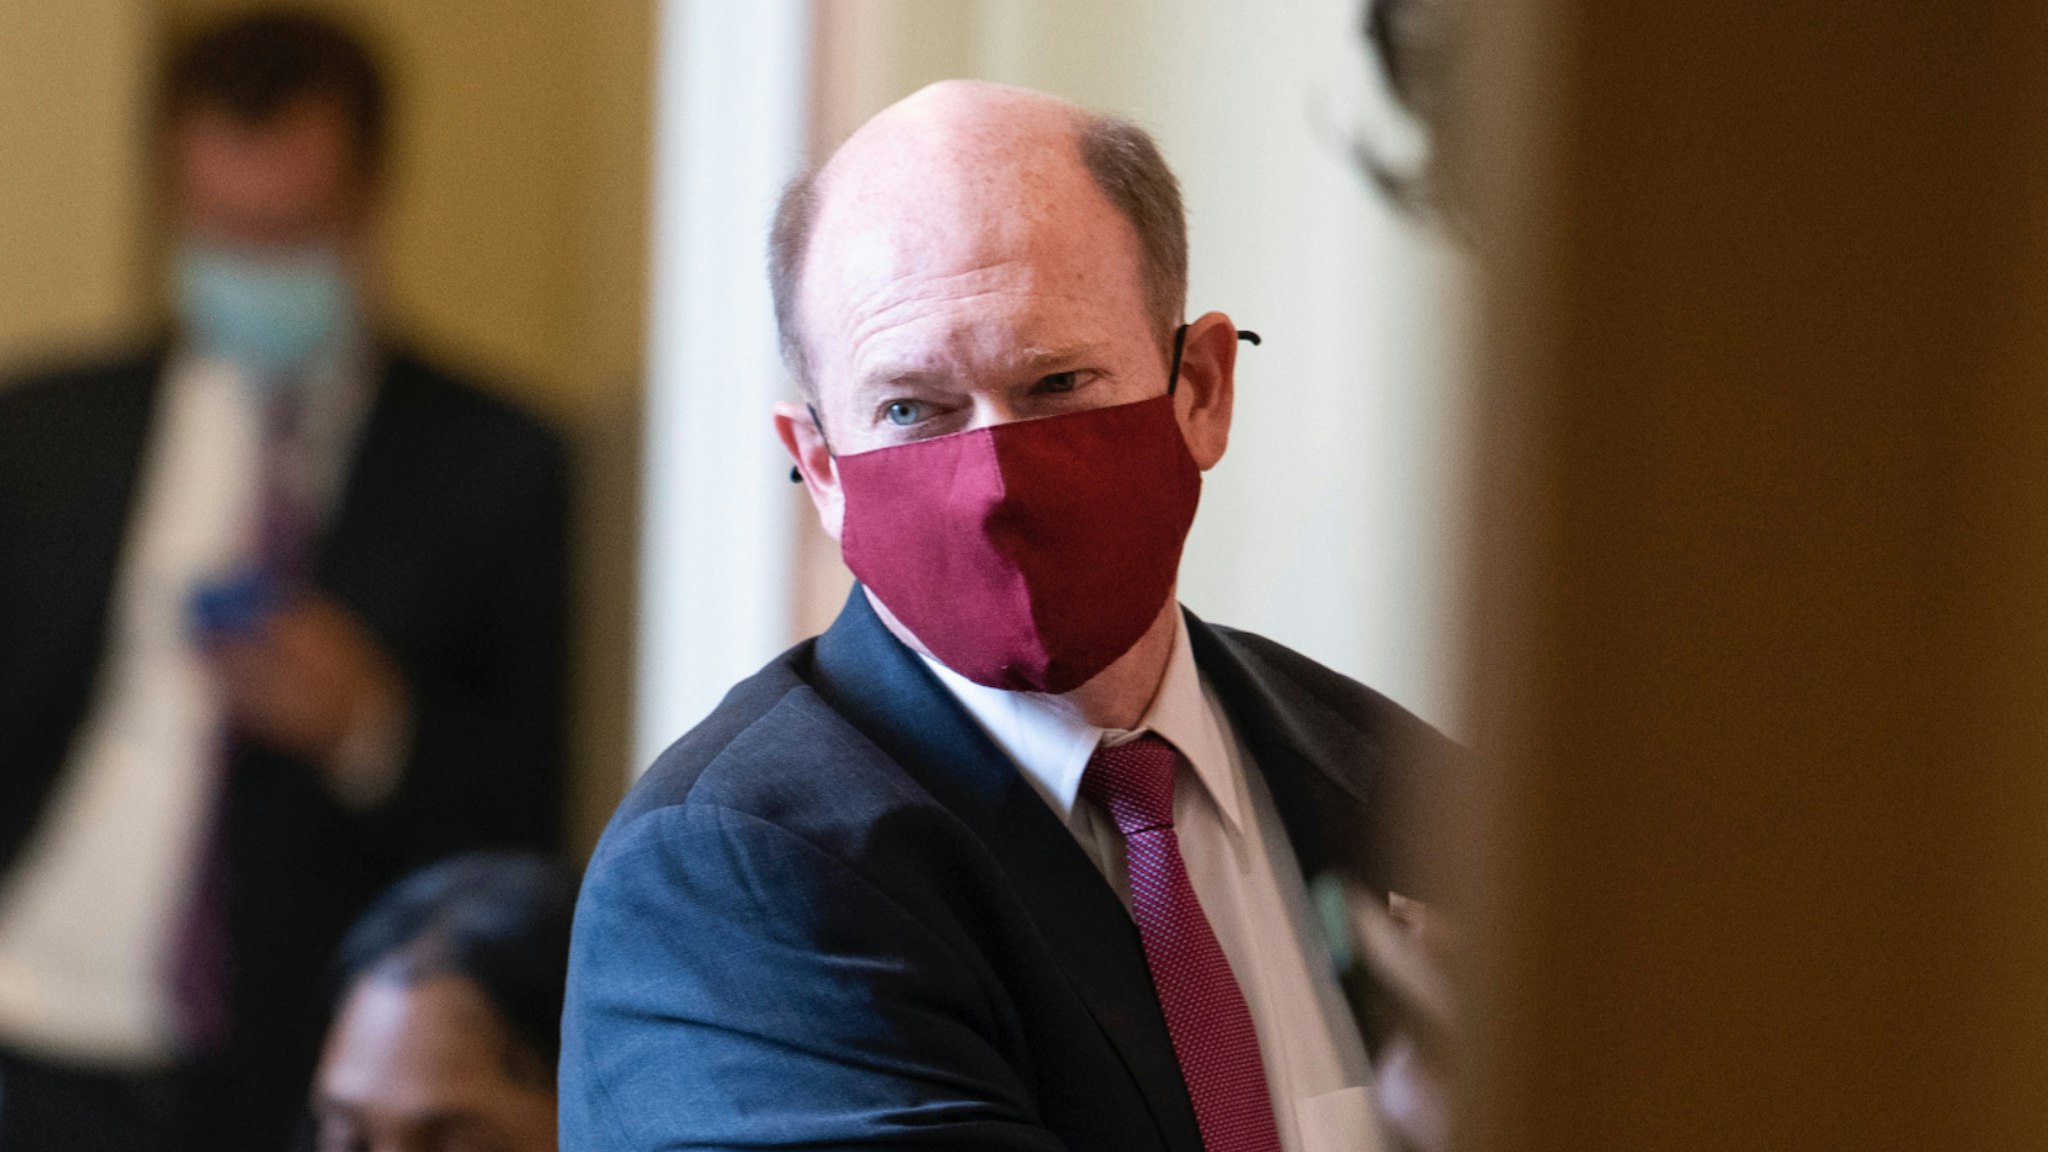 Sen. Chris Coons, D-Del., is seen after the Senate Democratic Policy luncheon in the U.S. Capitol on Tuesday, September 21, 2021.